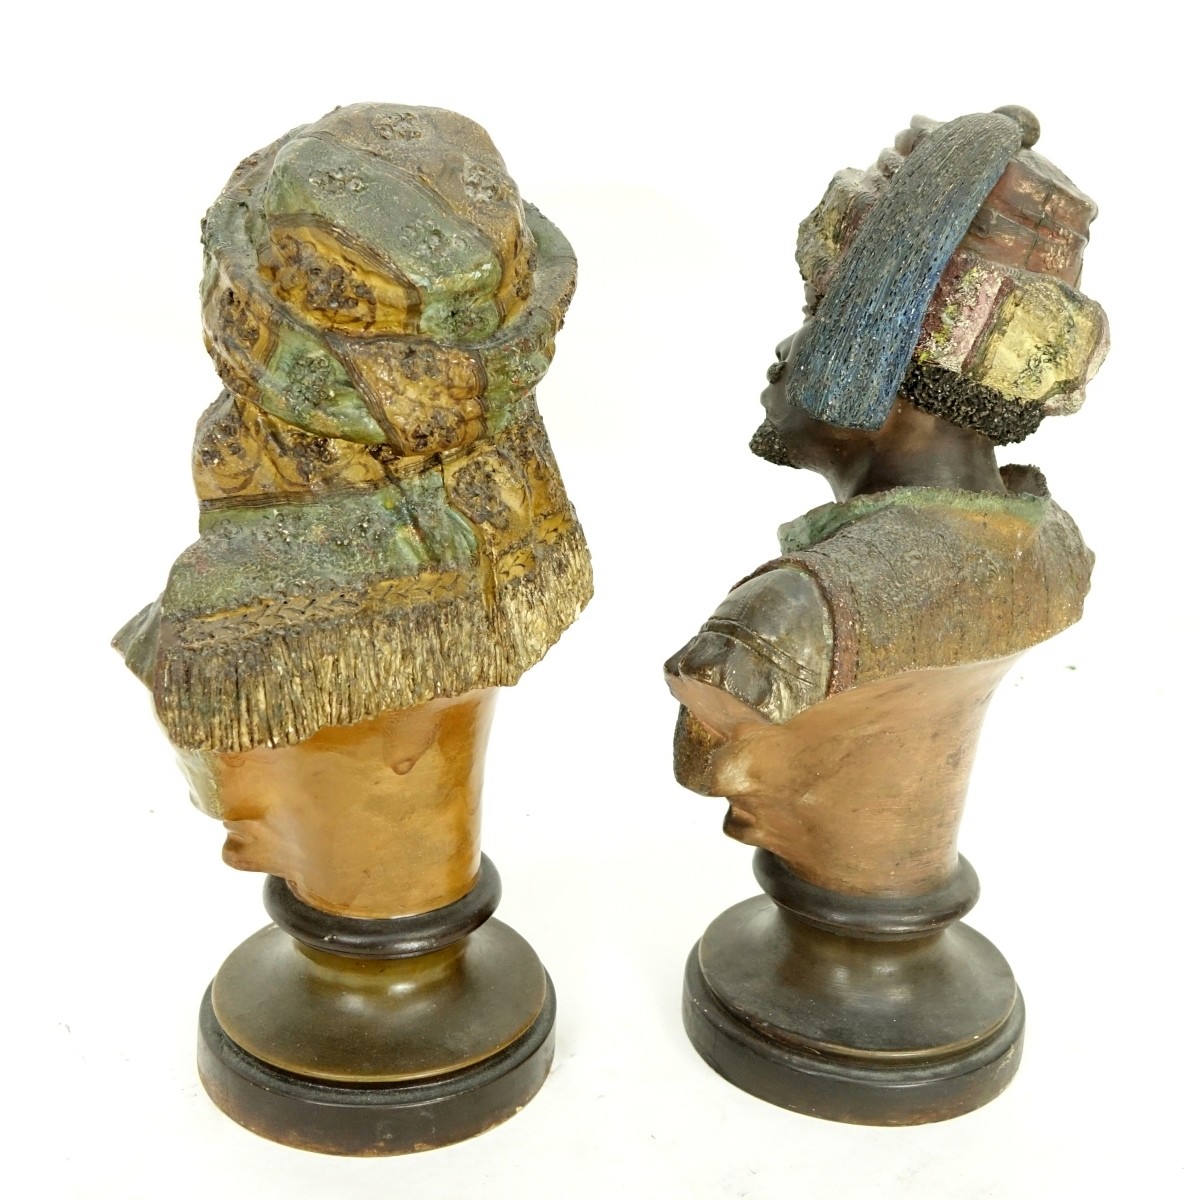 Pair of Polychrome Pottery Nubian Figures